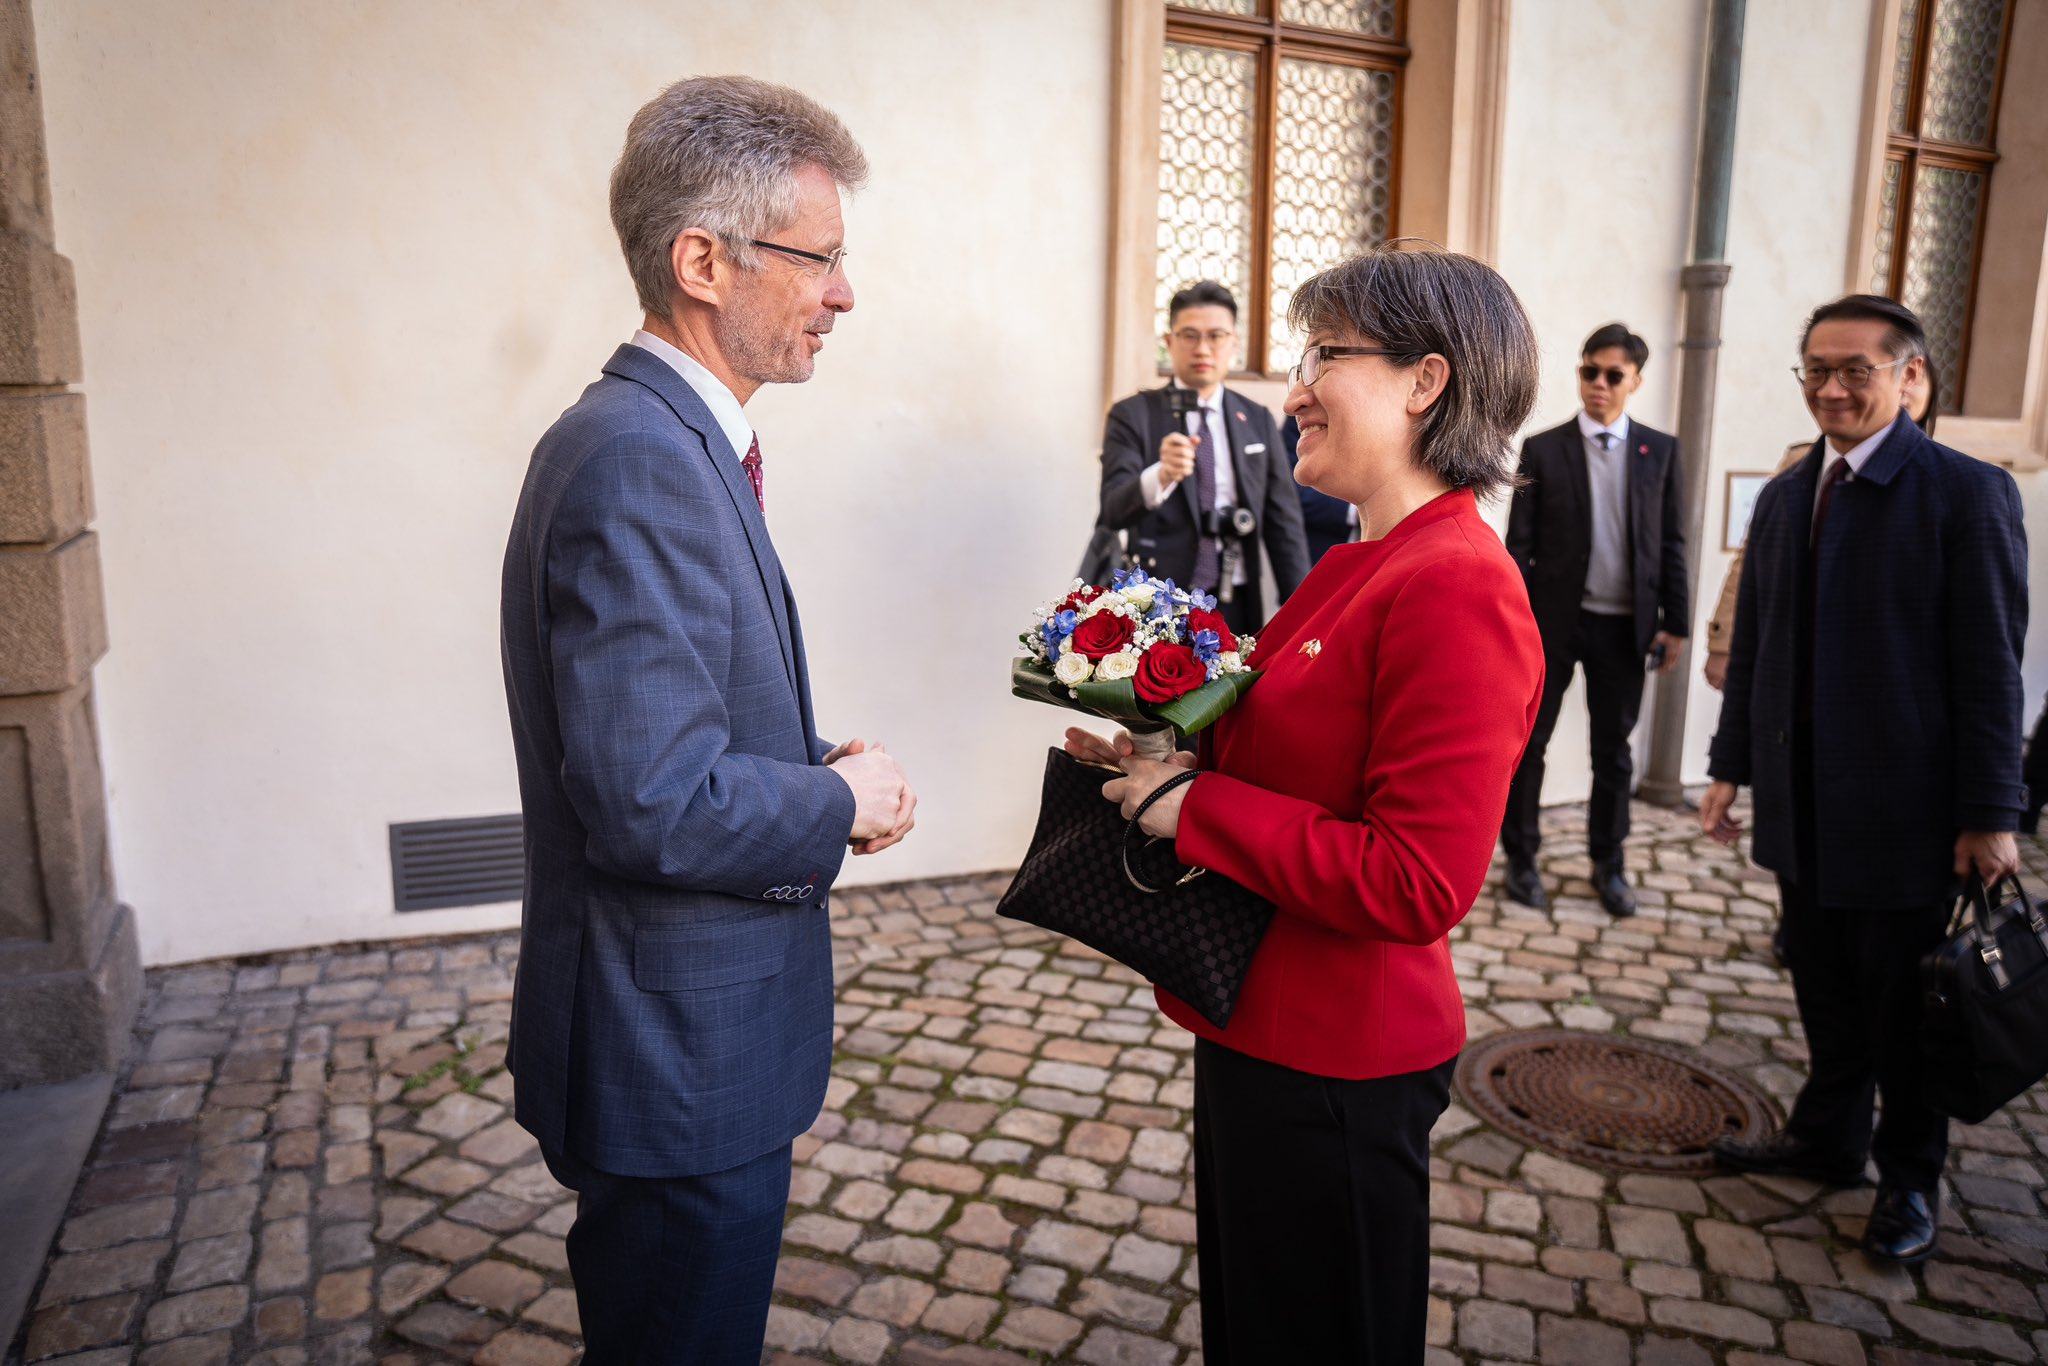 Czech Senate president Milos Vystrcil shared a picture of his meeting with Taiwan’s vice-president-elect, Hsiao Bi-khim, in Prague. Photo: X@Vystrcil_Milos